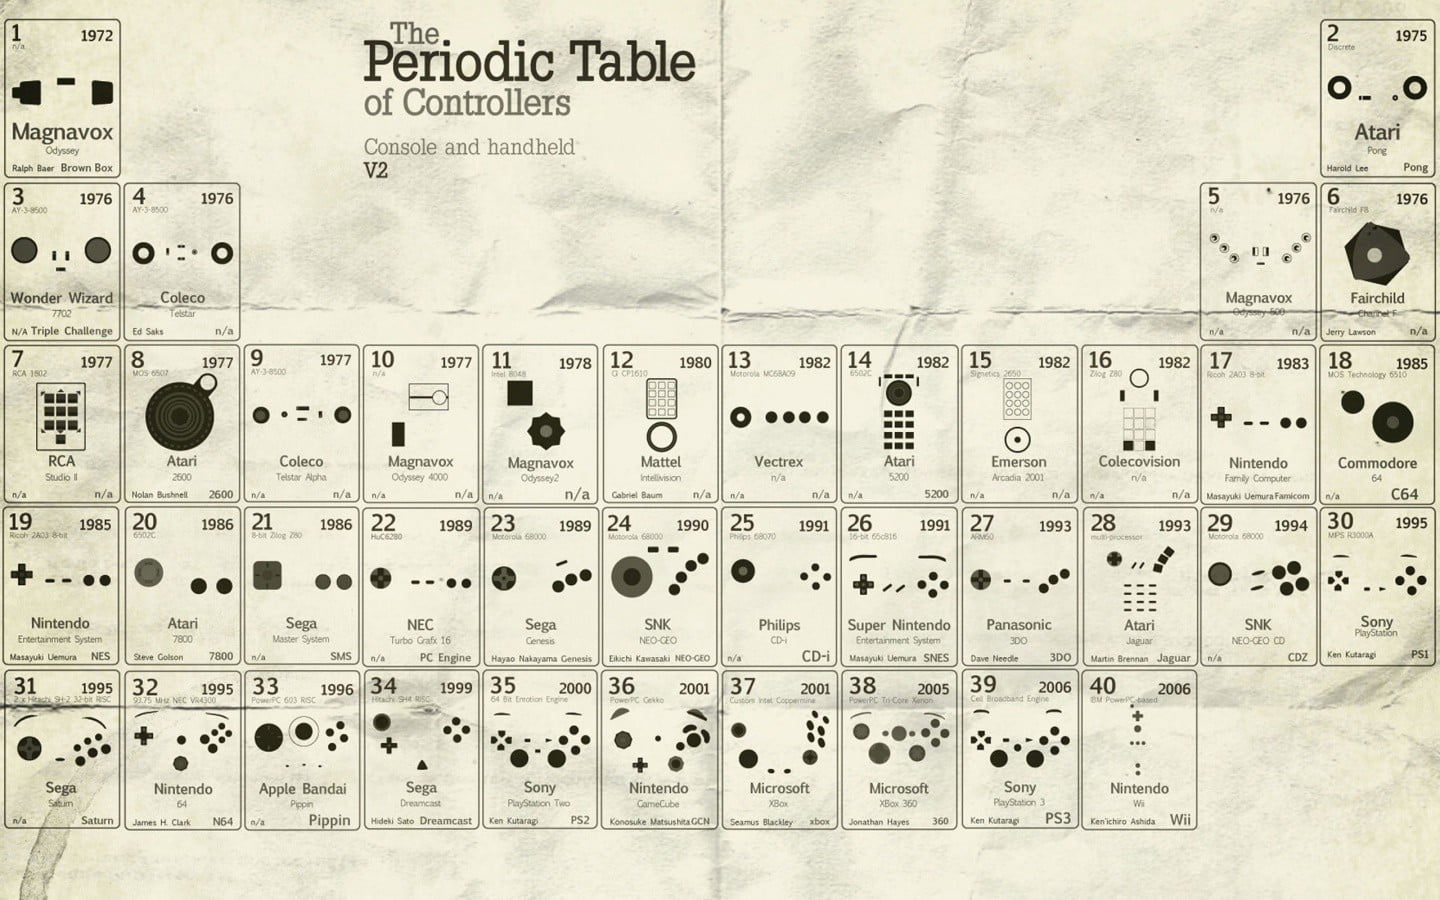 The Periodic Table of Controllers illustration, infographics